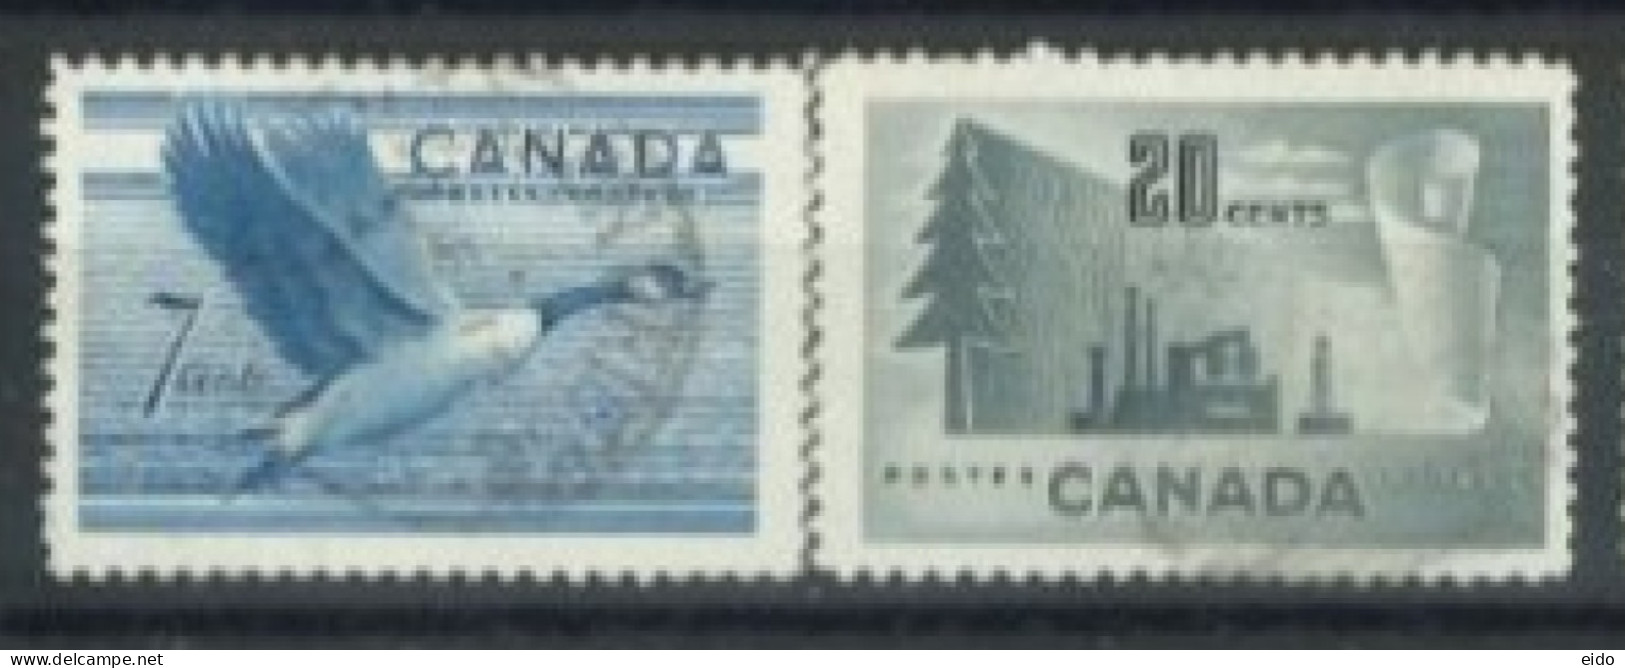 CANADA - 1951/52, CANADIAN GOOSE & FORESTY PRODUCTS STAMPS SET OF 2, USED. - Oblitérés